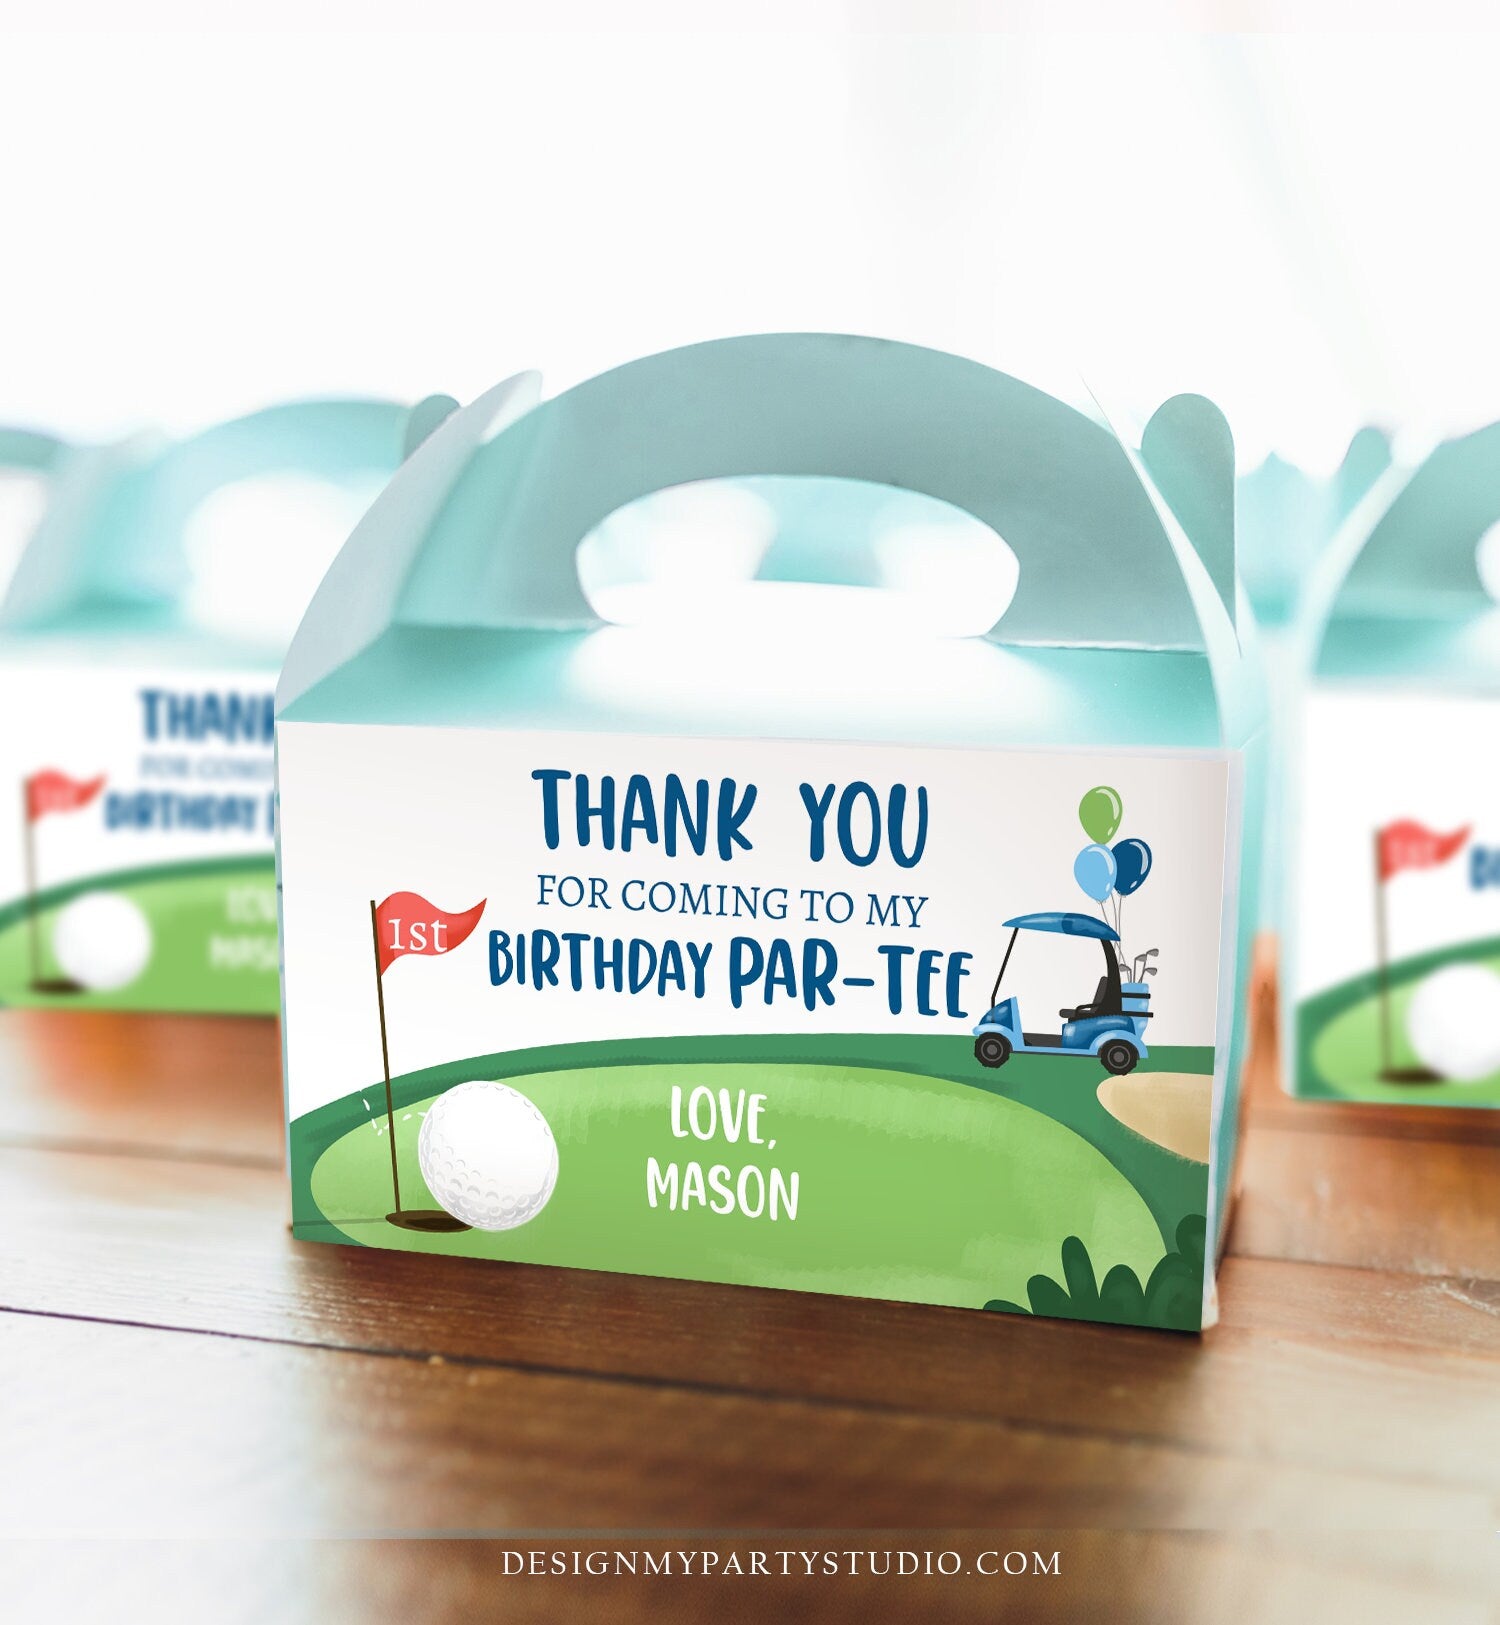 Editable Hole in One Birthday Party Gable Box Favor Label Golf Gift Box Labels Par-tee Boy Golfing 1st Blue Download Printable Corjl 0405